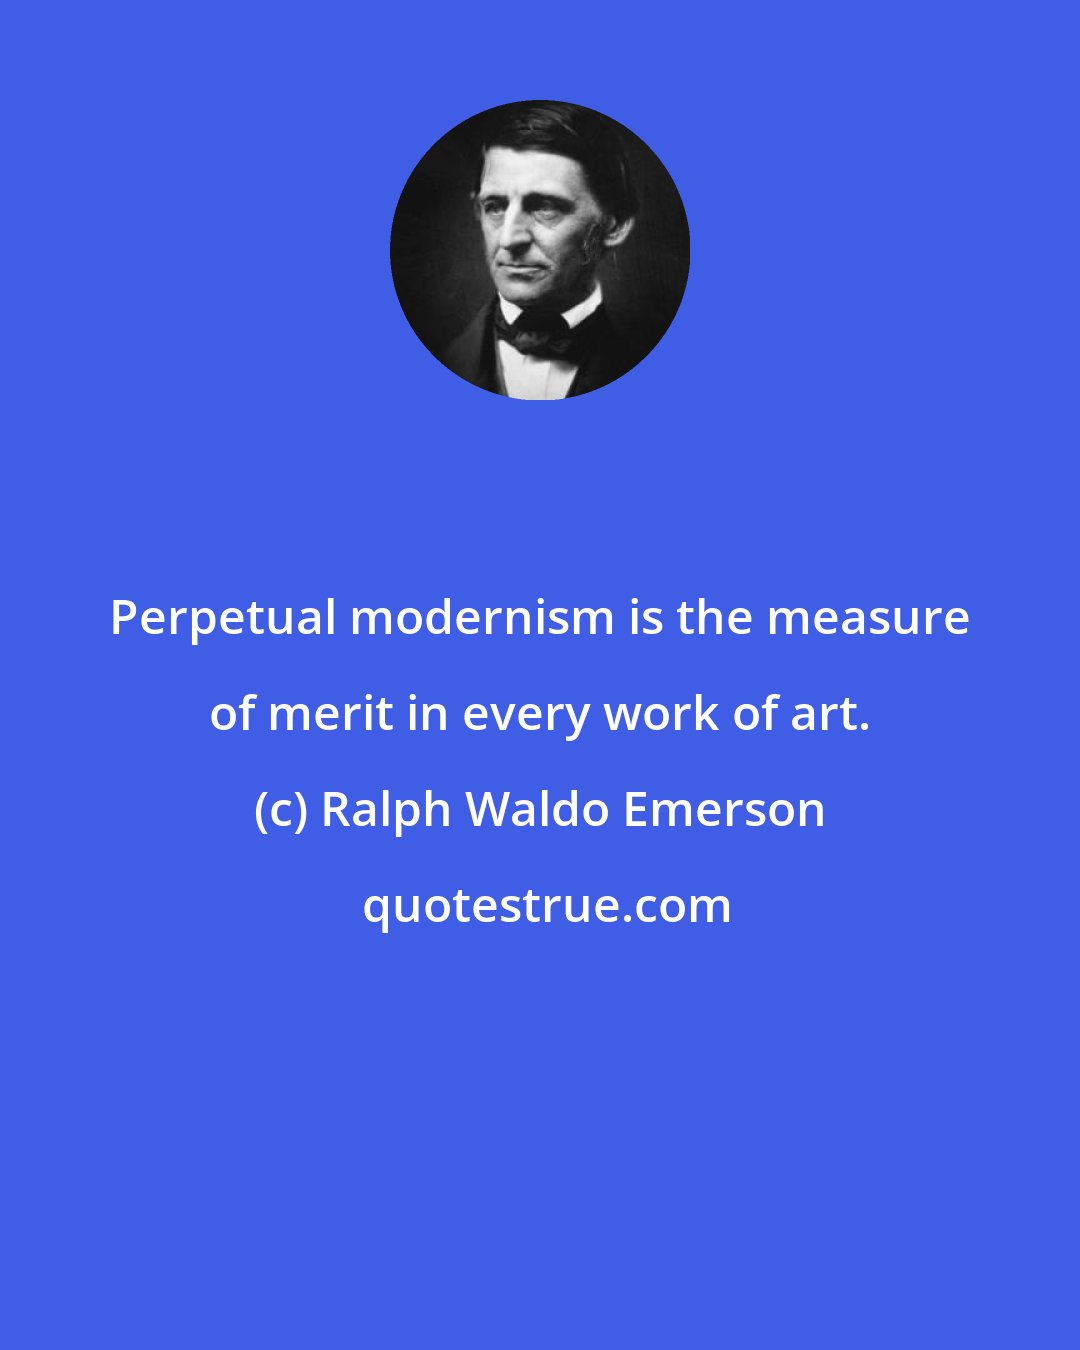 Ralph Waldo Emerson: Perpetual modernism is the measure of merit in every work of art.